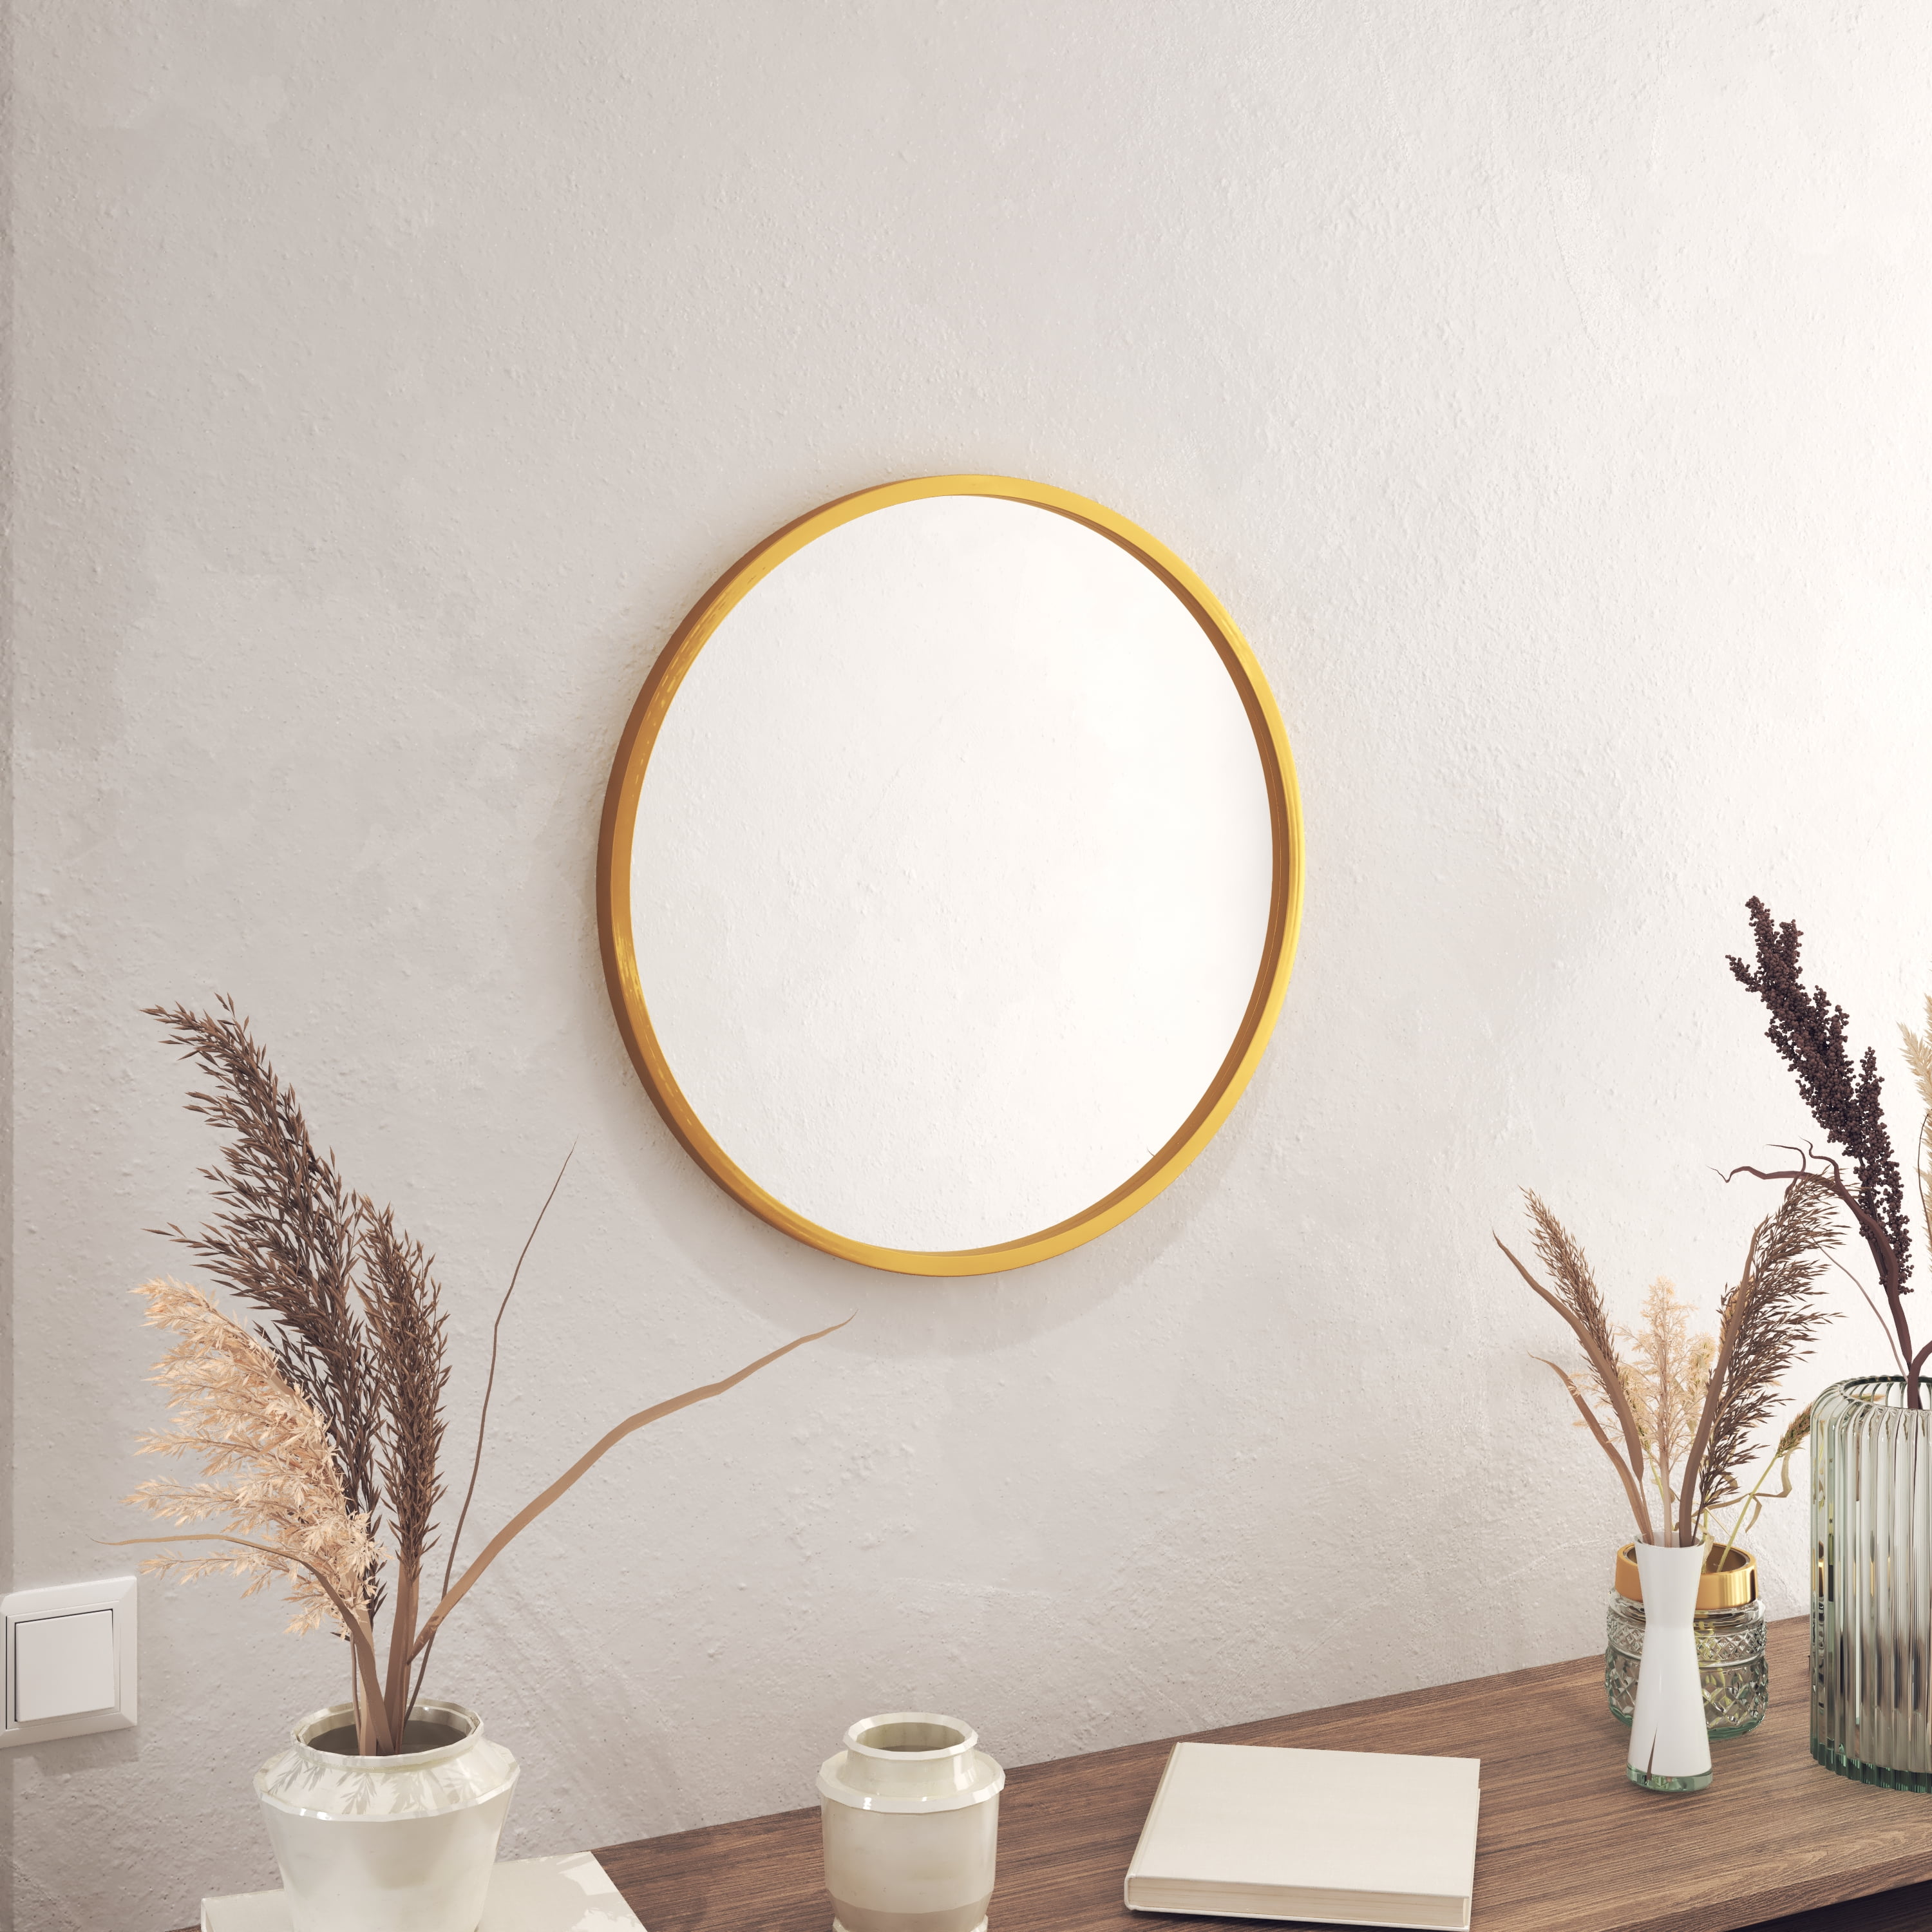 YOAYO Round Decorative Wall Mirror Large Circle Ornate Accent Mirrors 24” X  24” Circular Silver Mirror for Bedroom Bathroom, Vanity, Living Room,  Bedroom, Entryway Wall Decor : : Home & Kitchen